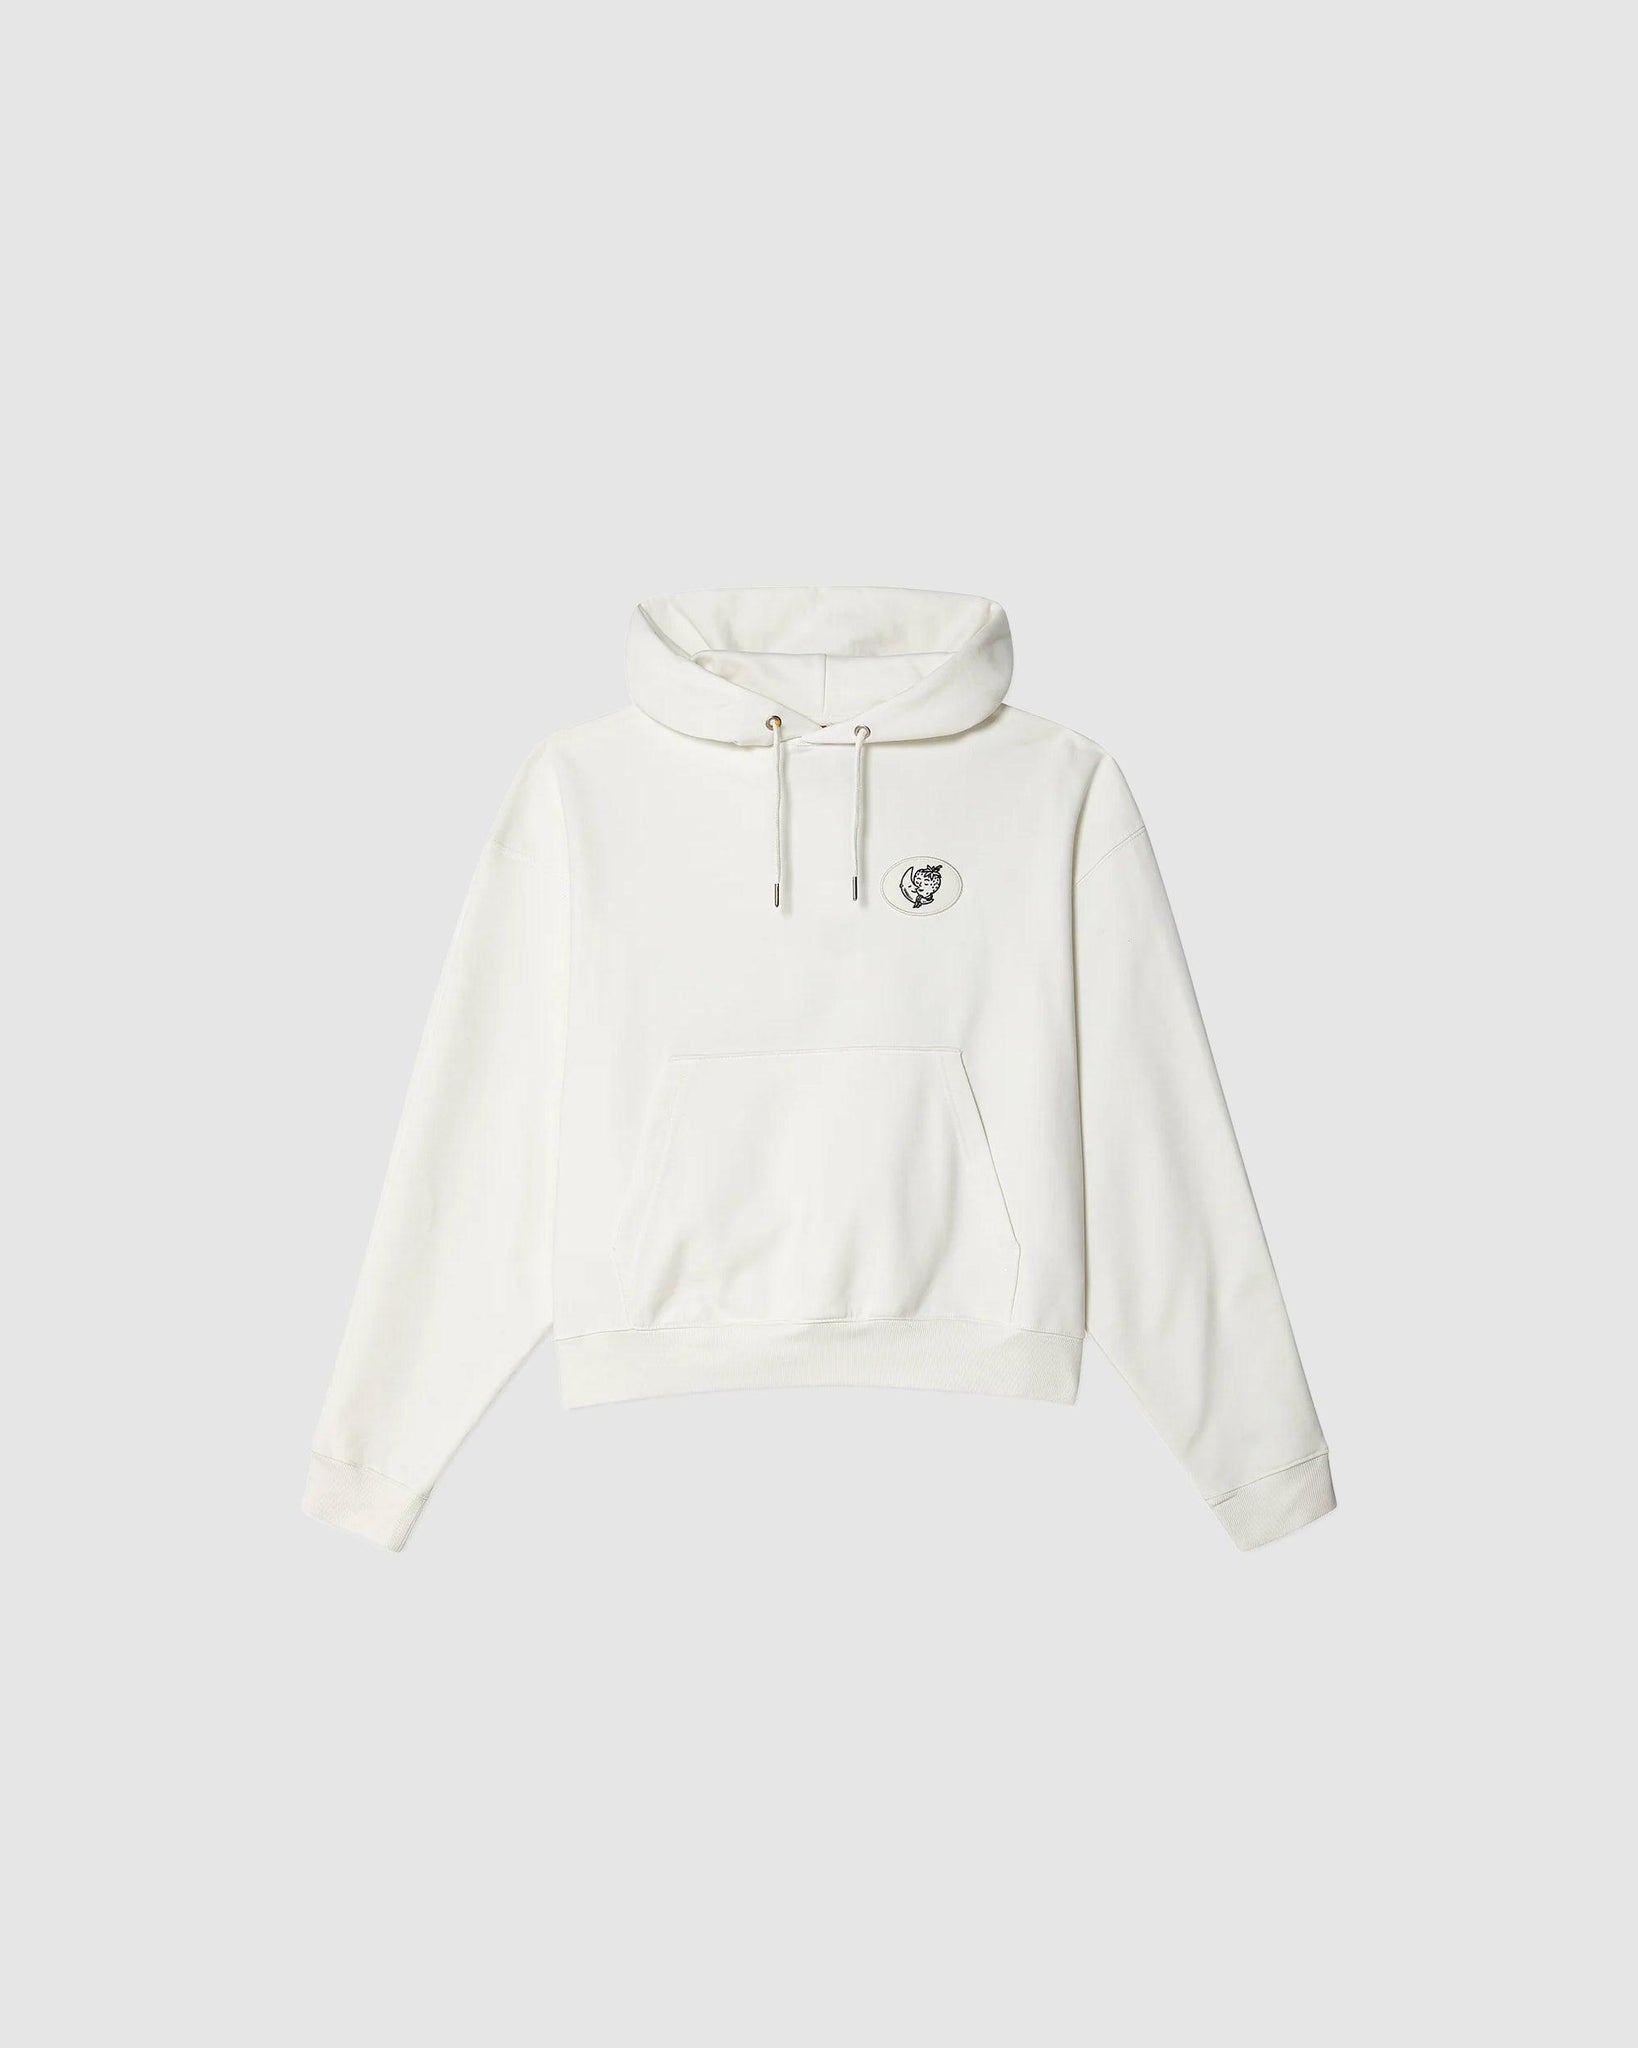 Alastair McKimm Workwear Hoodie - {{ collection.title }} - Chinatown Country Club 